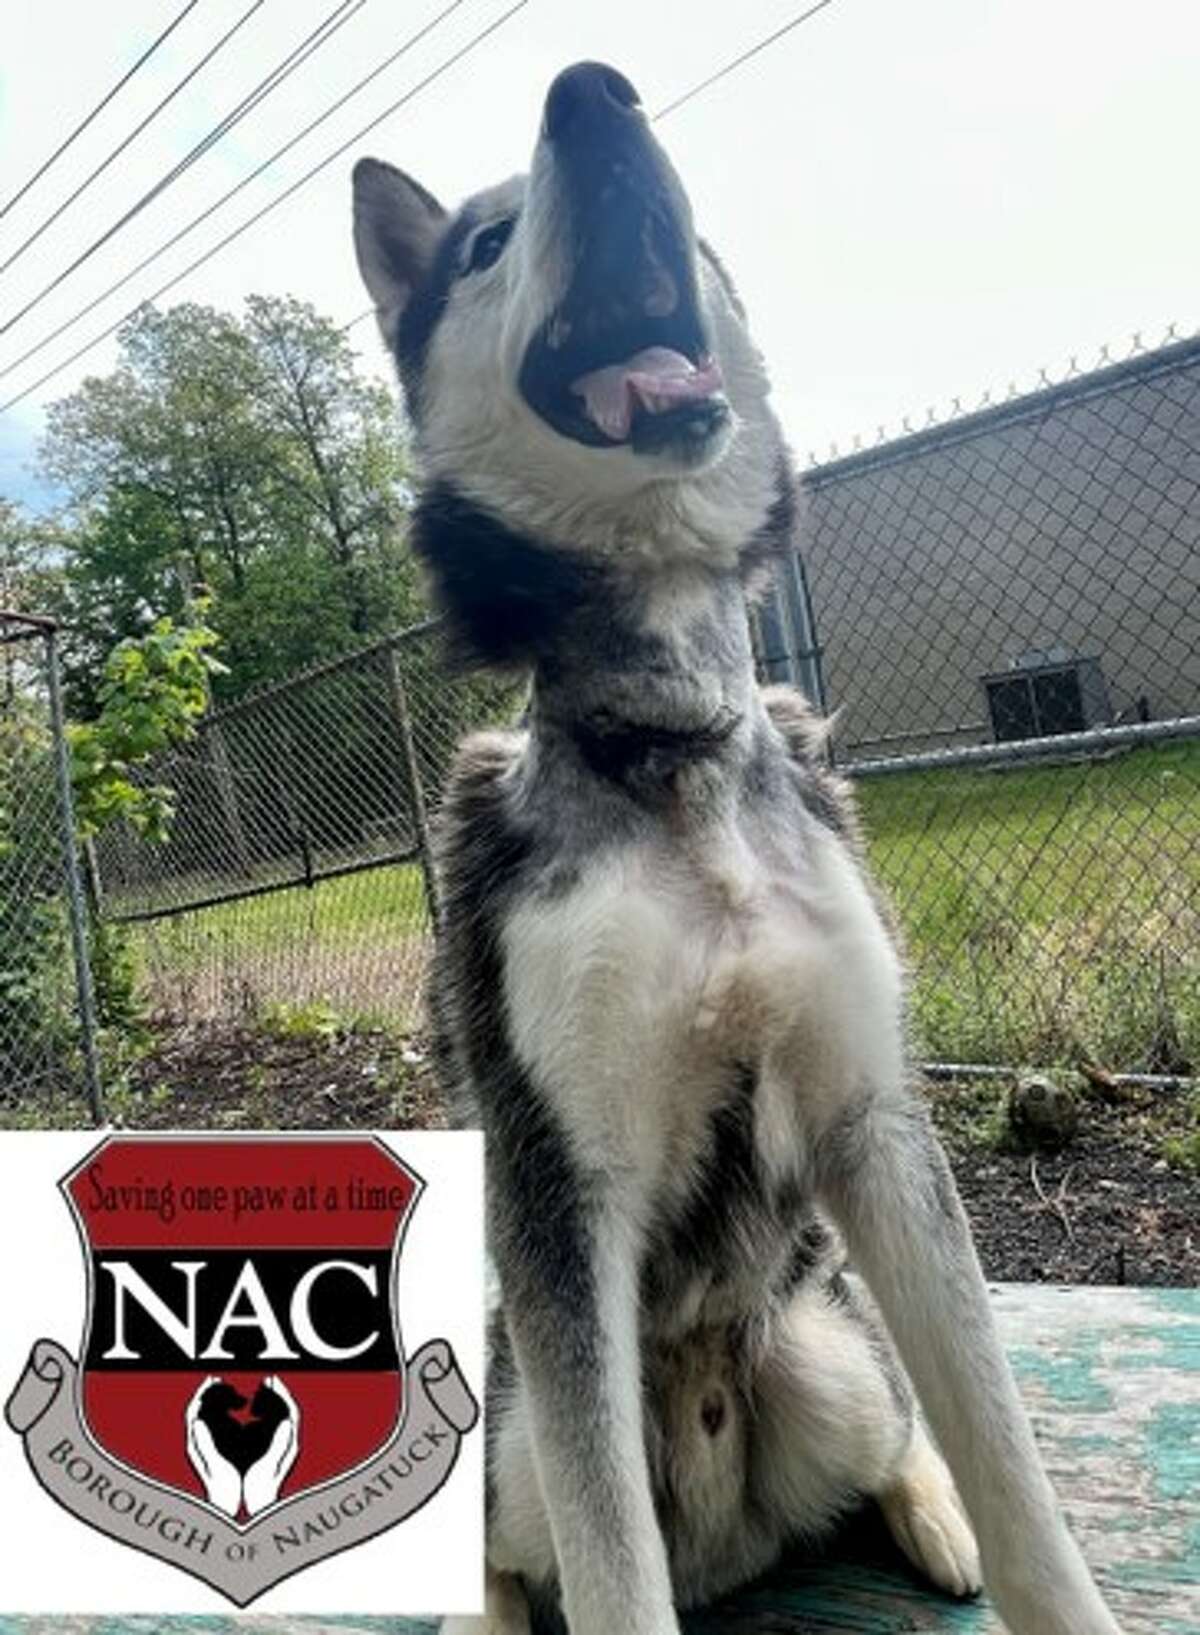 Naugatuck police say they have launched an animal cruelty investigation after a male Siberian husky suffering from multiple health problems was found roaming near the Waterbury border on the afternoon of May 13. The husky, named Justice, underwent surgery to remove a length of chain embedded in his neck, Sgt. Danielle Durette said at a news conference Monday.